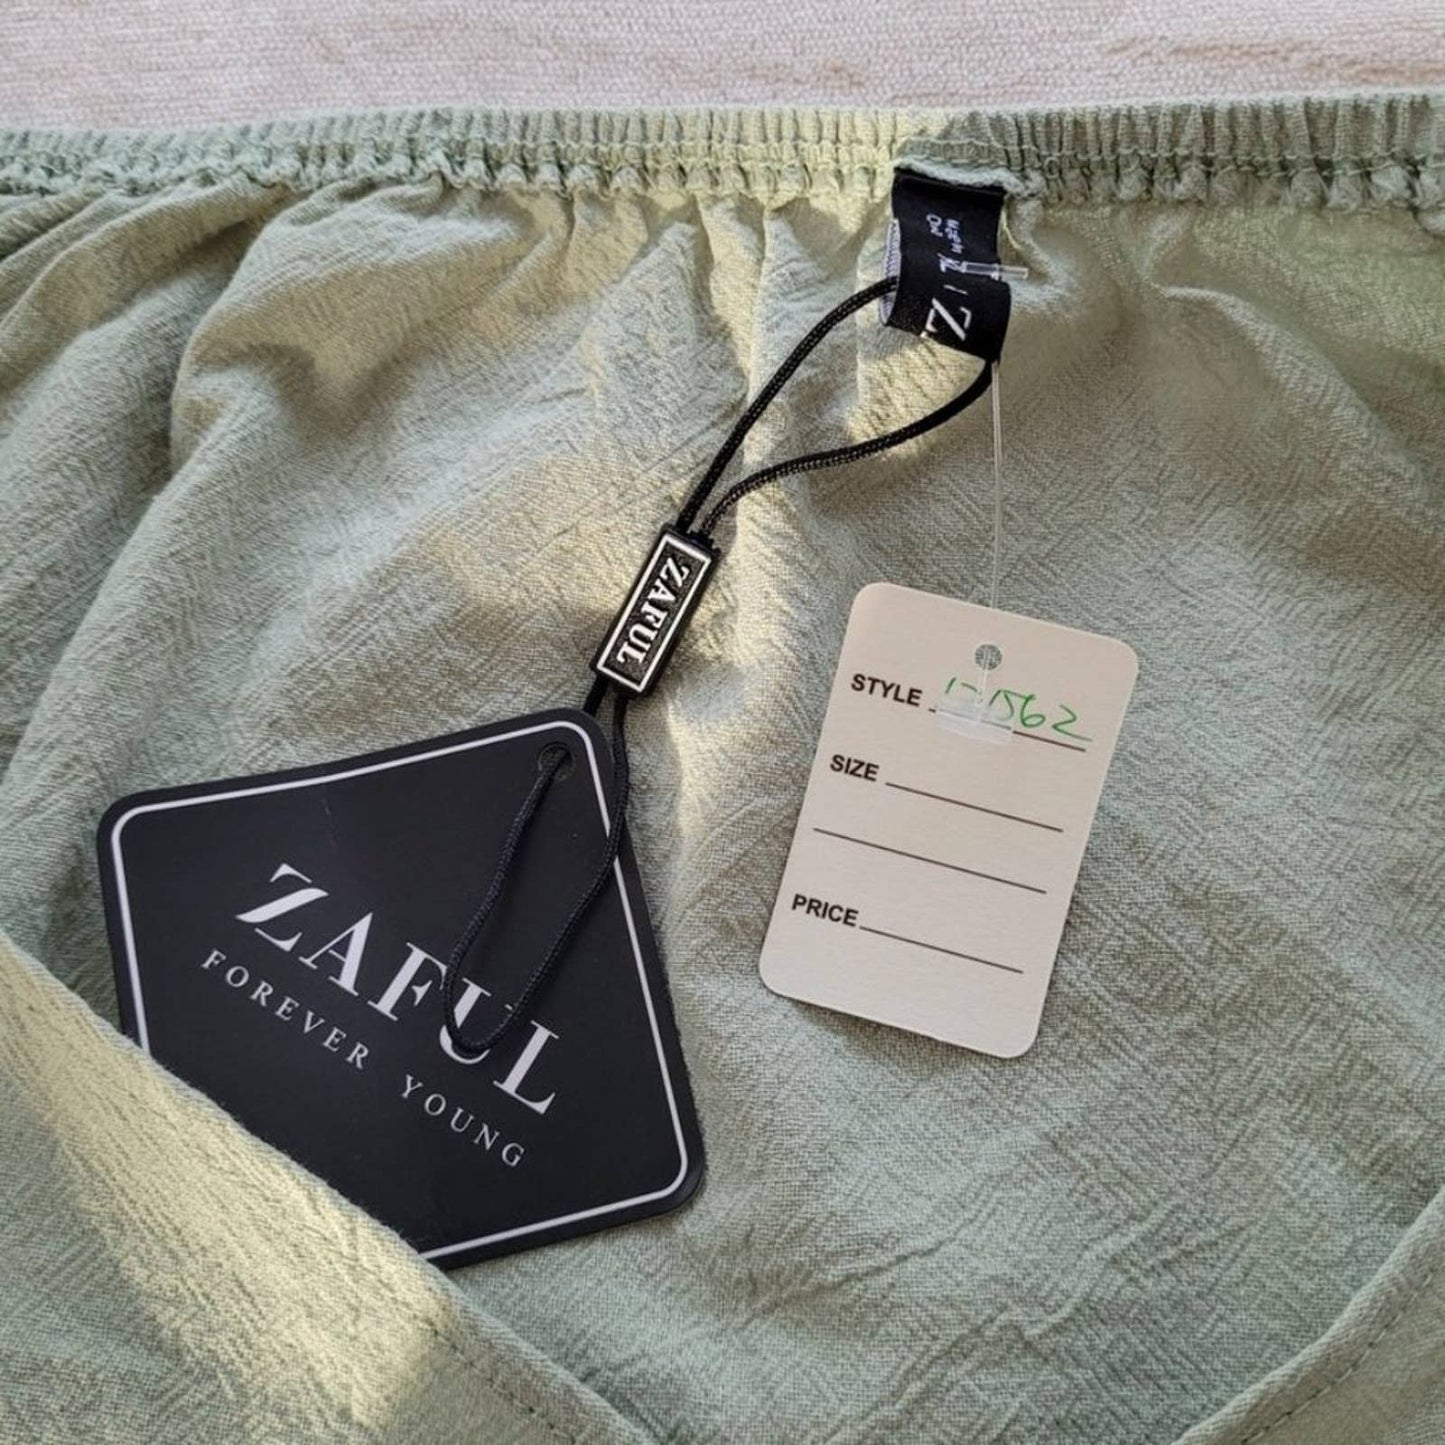 Zaful 2 Piece Green Outfit - Size Extra Large